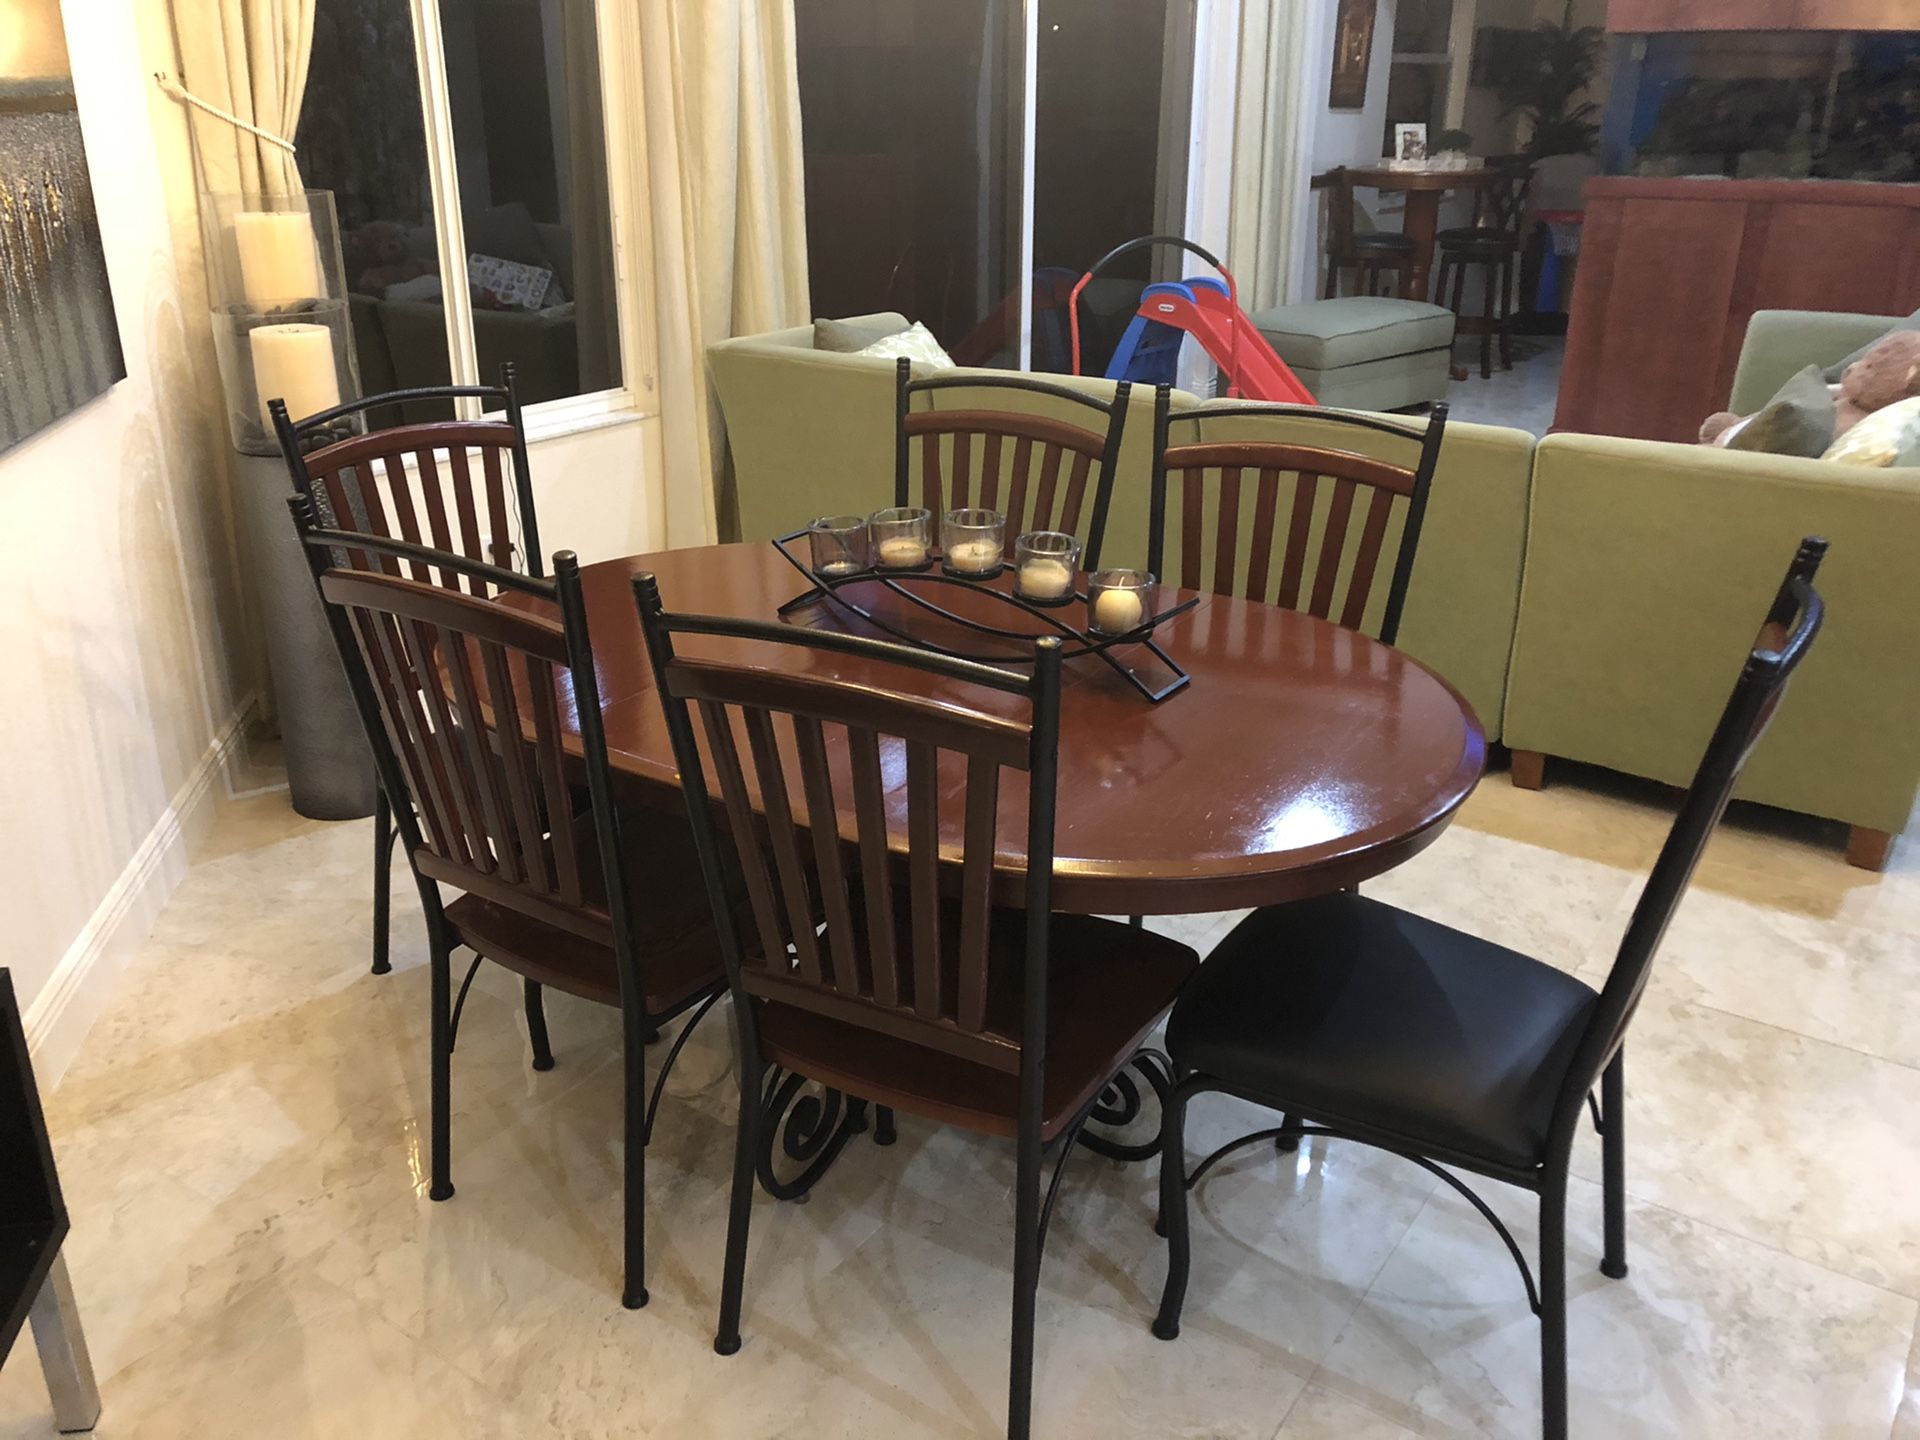 Dining table set with chairs and bar stools